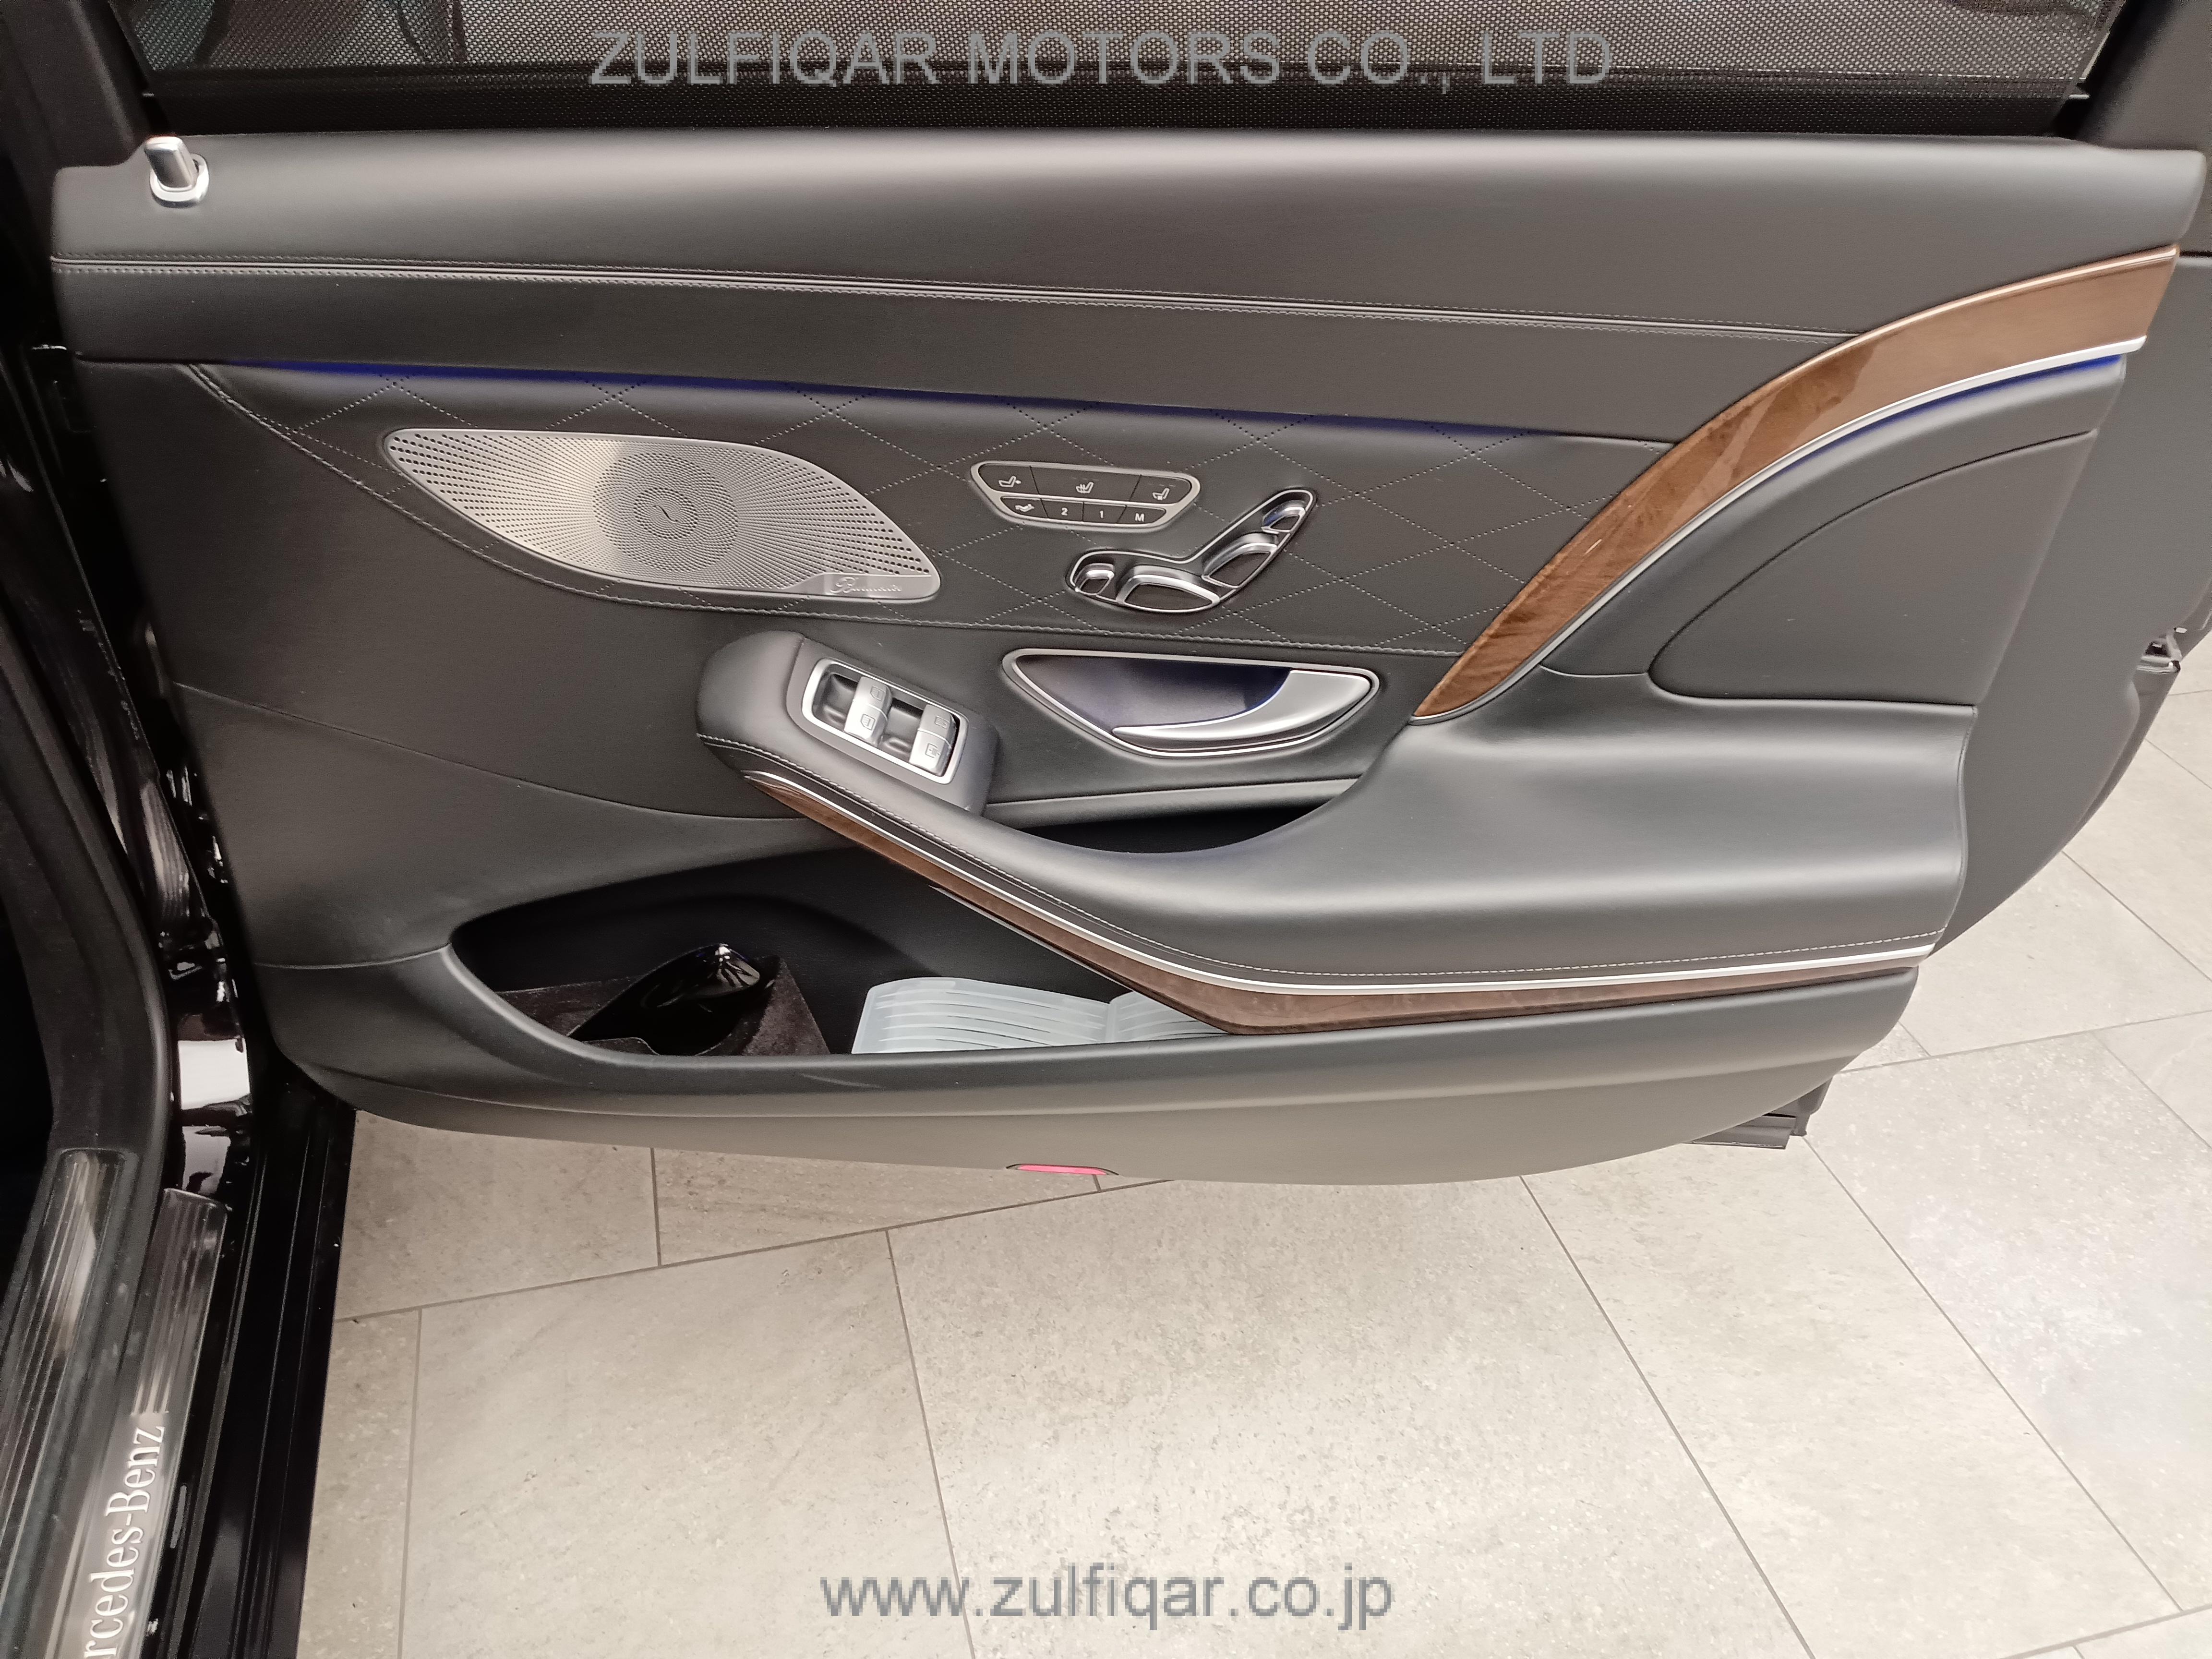 MERCEDES MAYBACH S CLASS 2015 Image 40